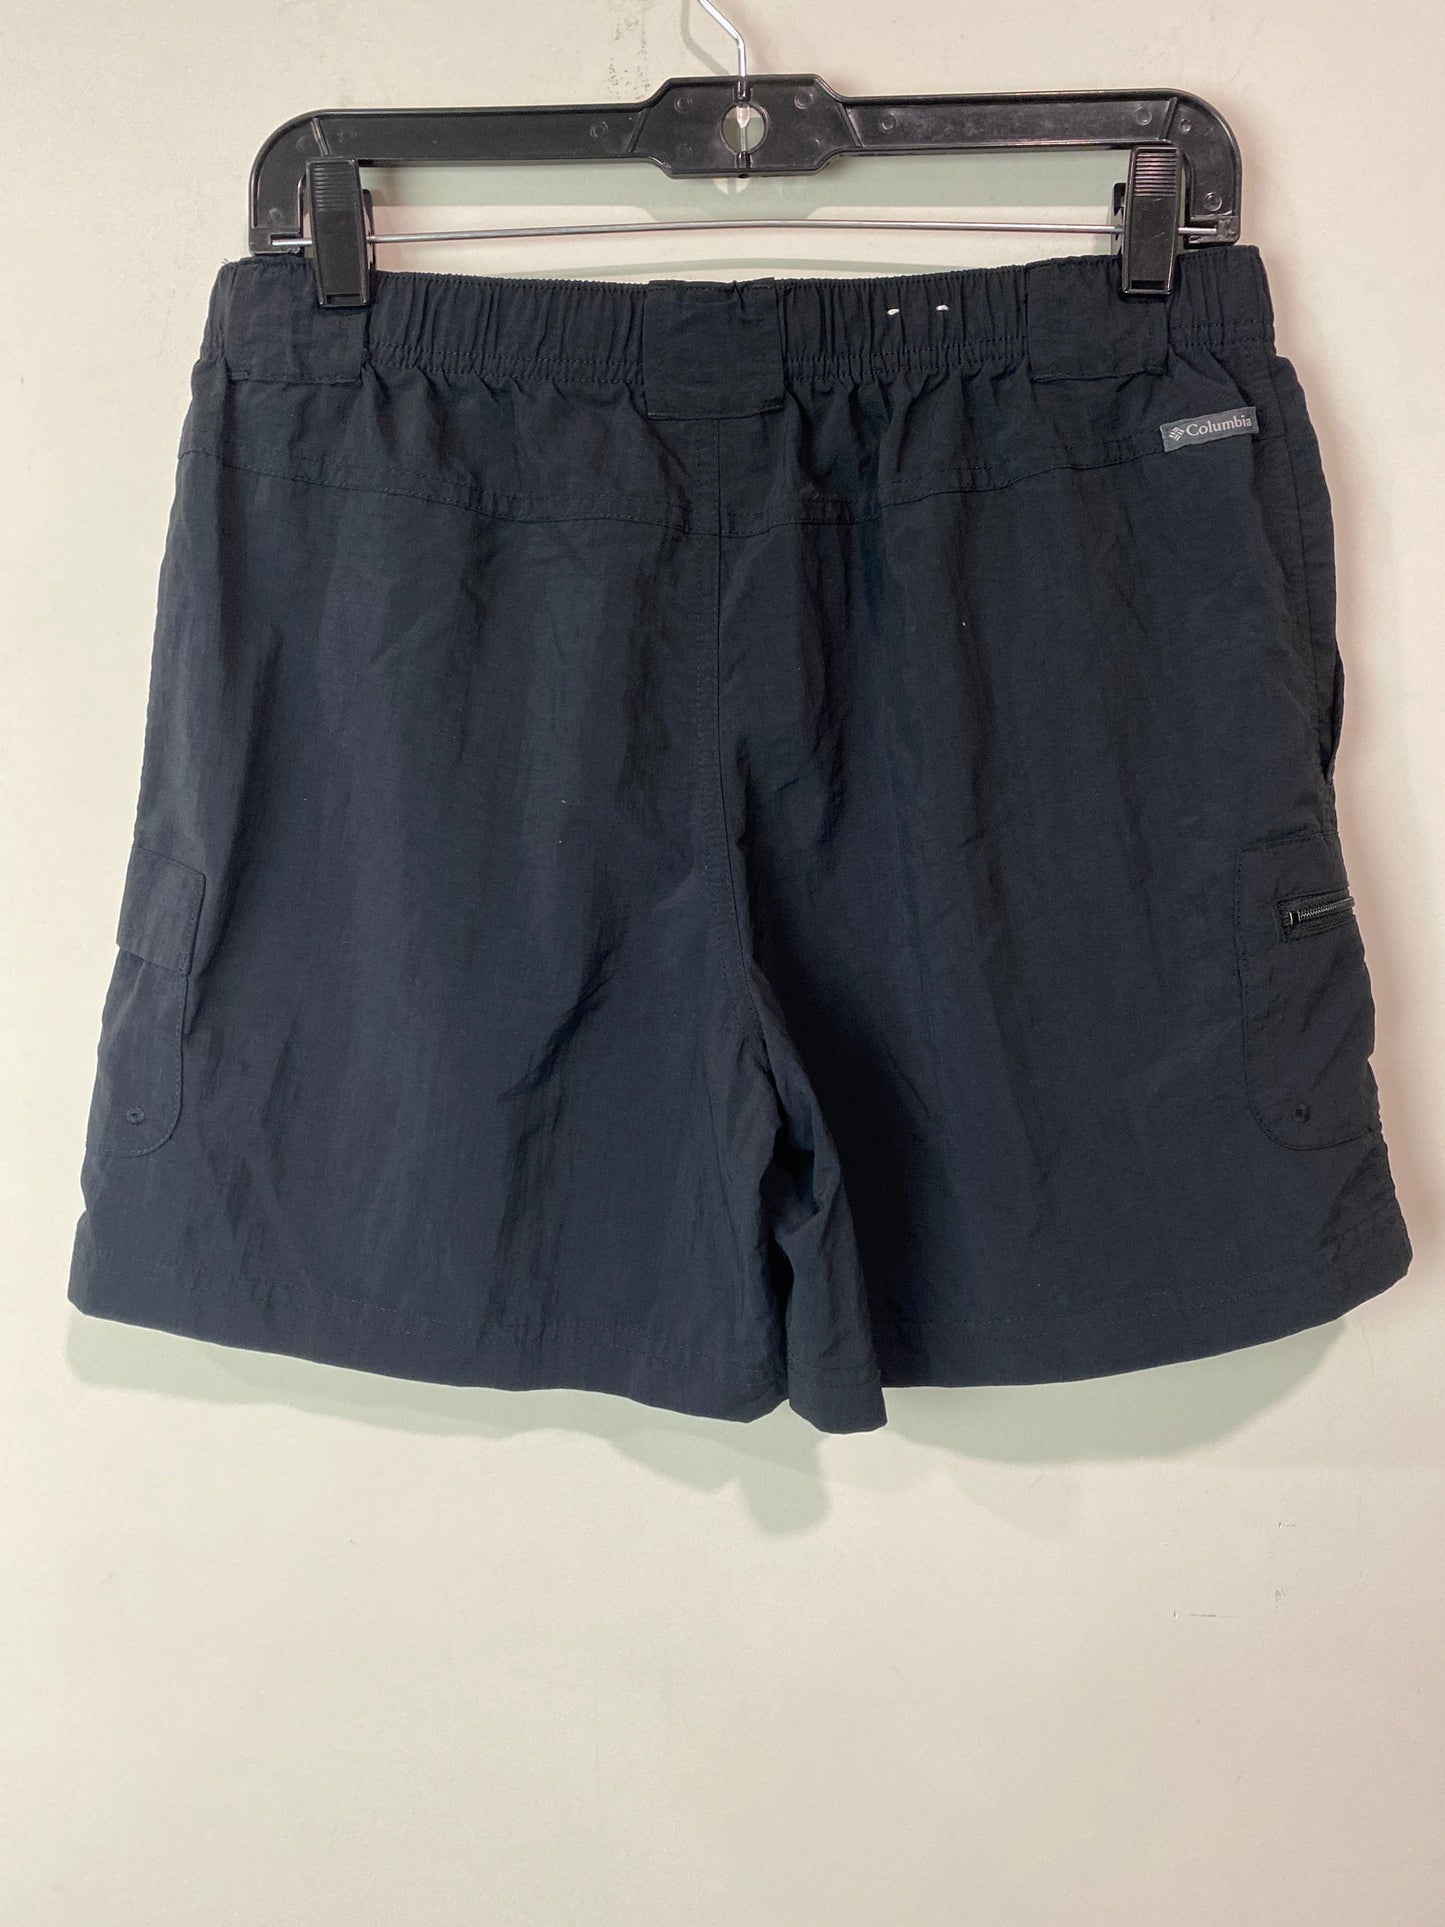 Shorts By Columbia  Size: M